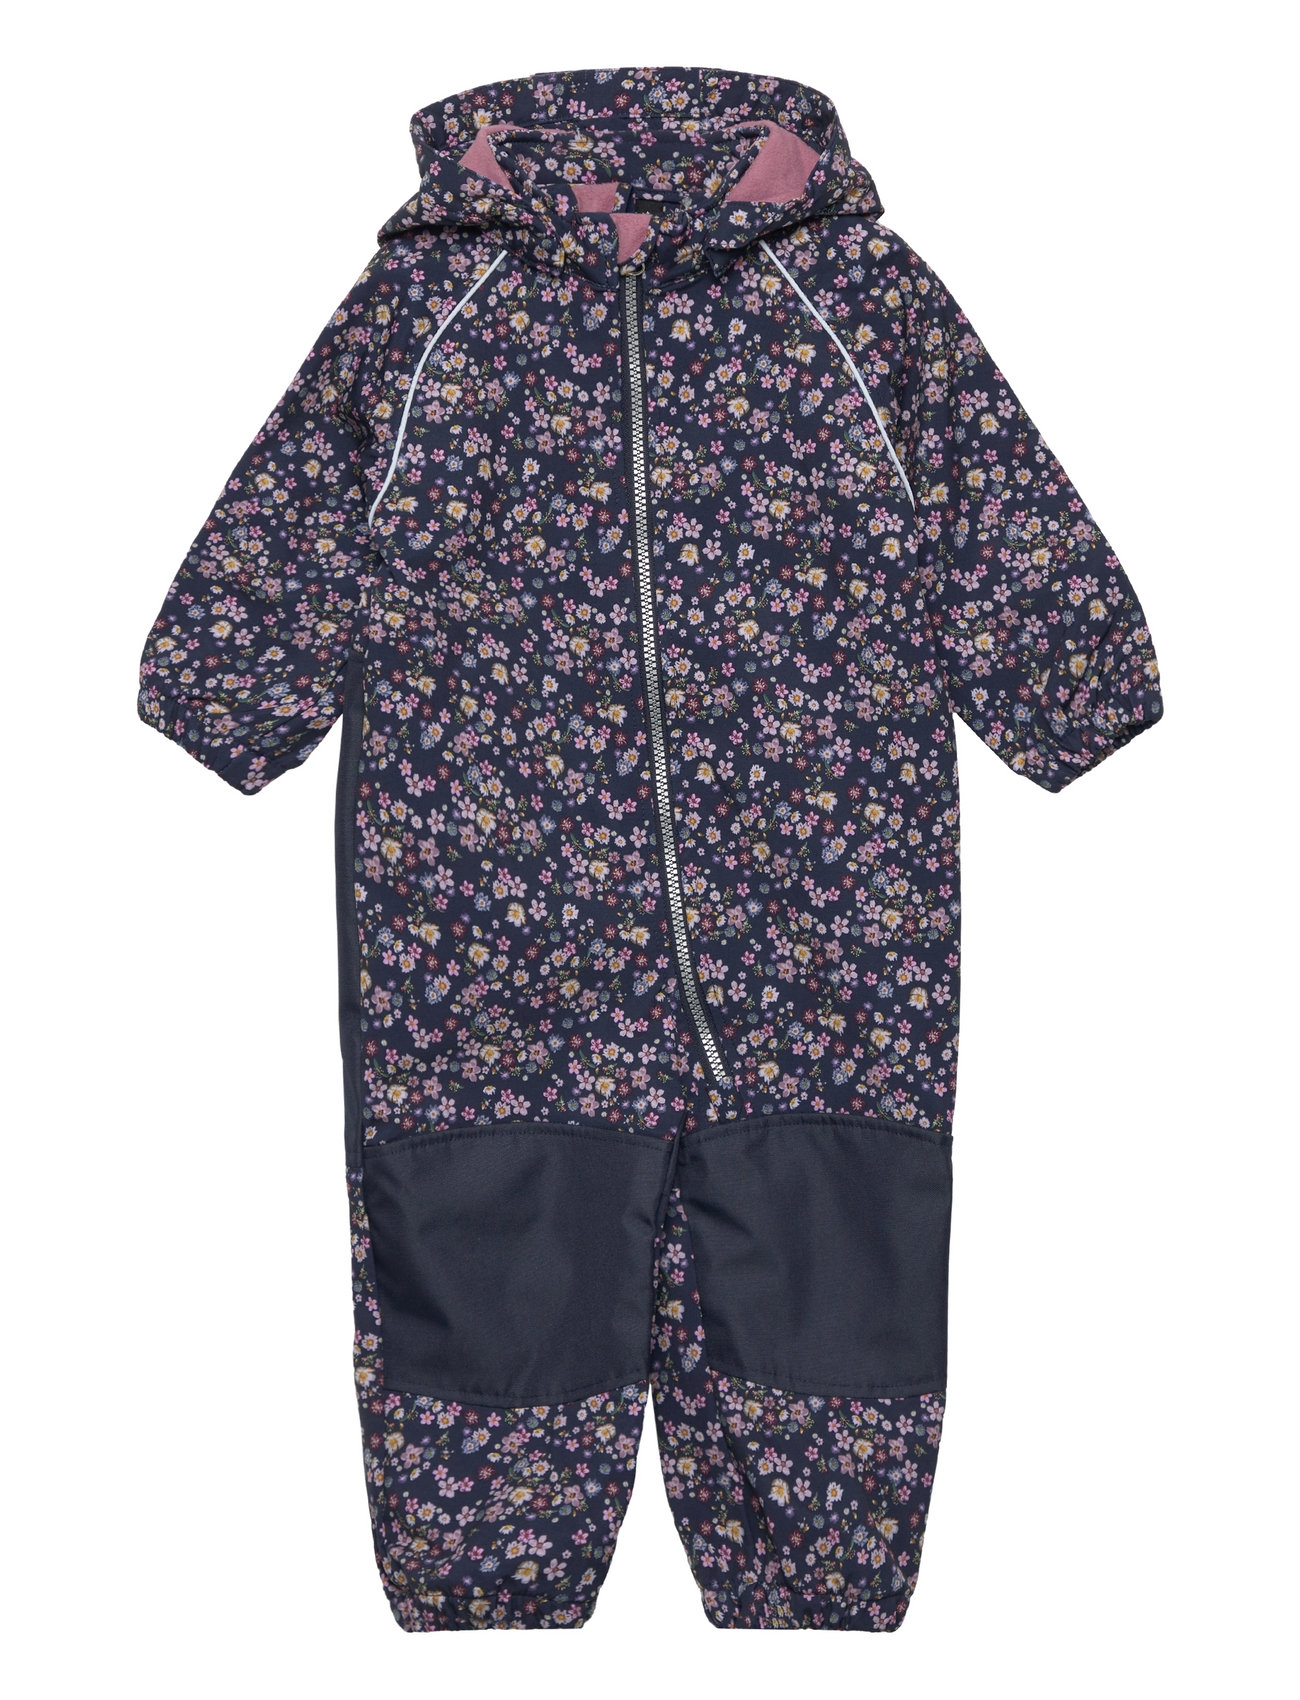 name it Nmfalfa08 returns Fo Coveralls €. from delivery and Buy easy at Boozt.com. Flower 28.50 Suit it Liberty Fast online name 